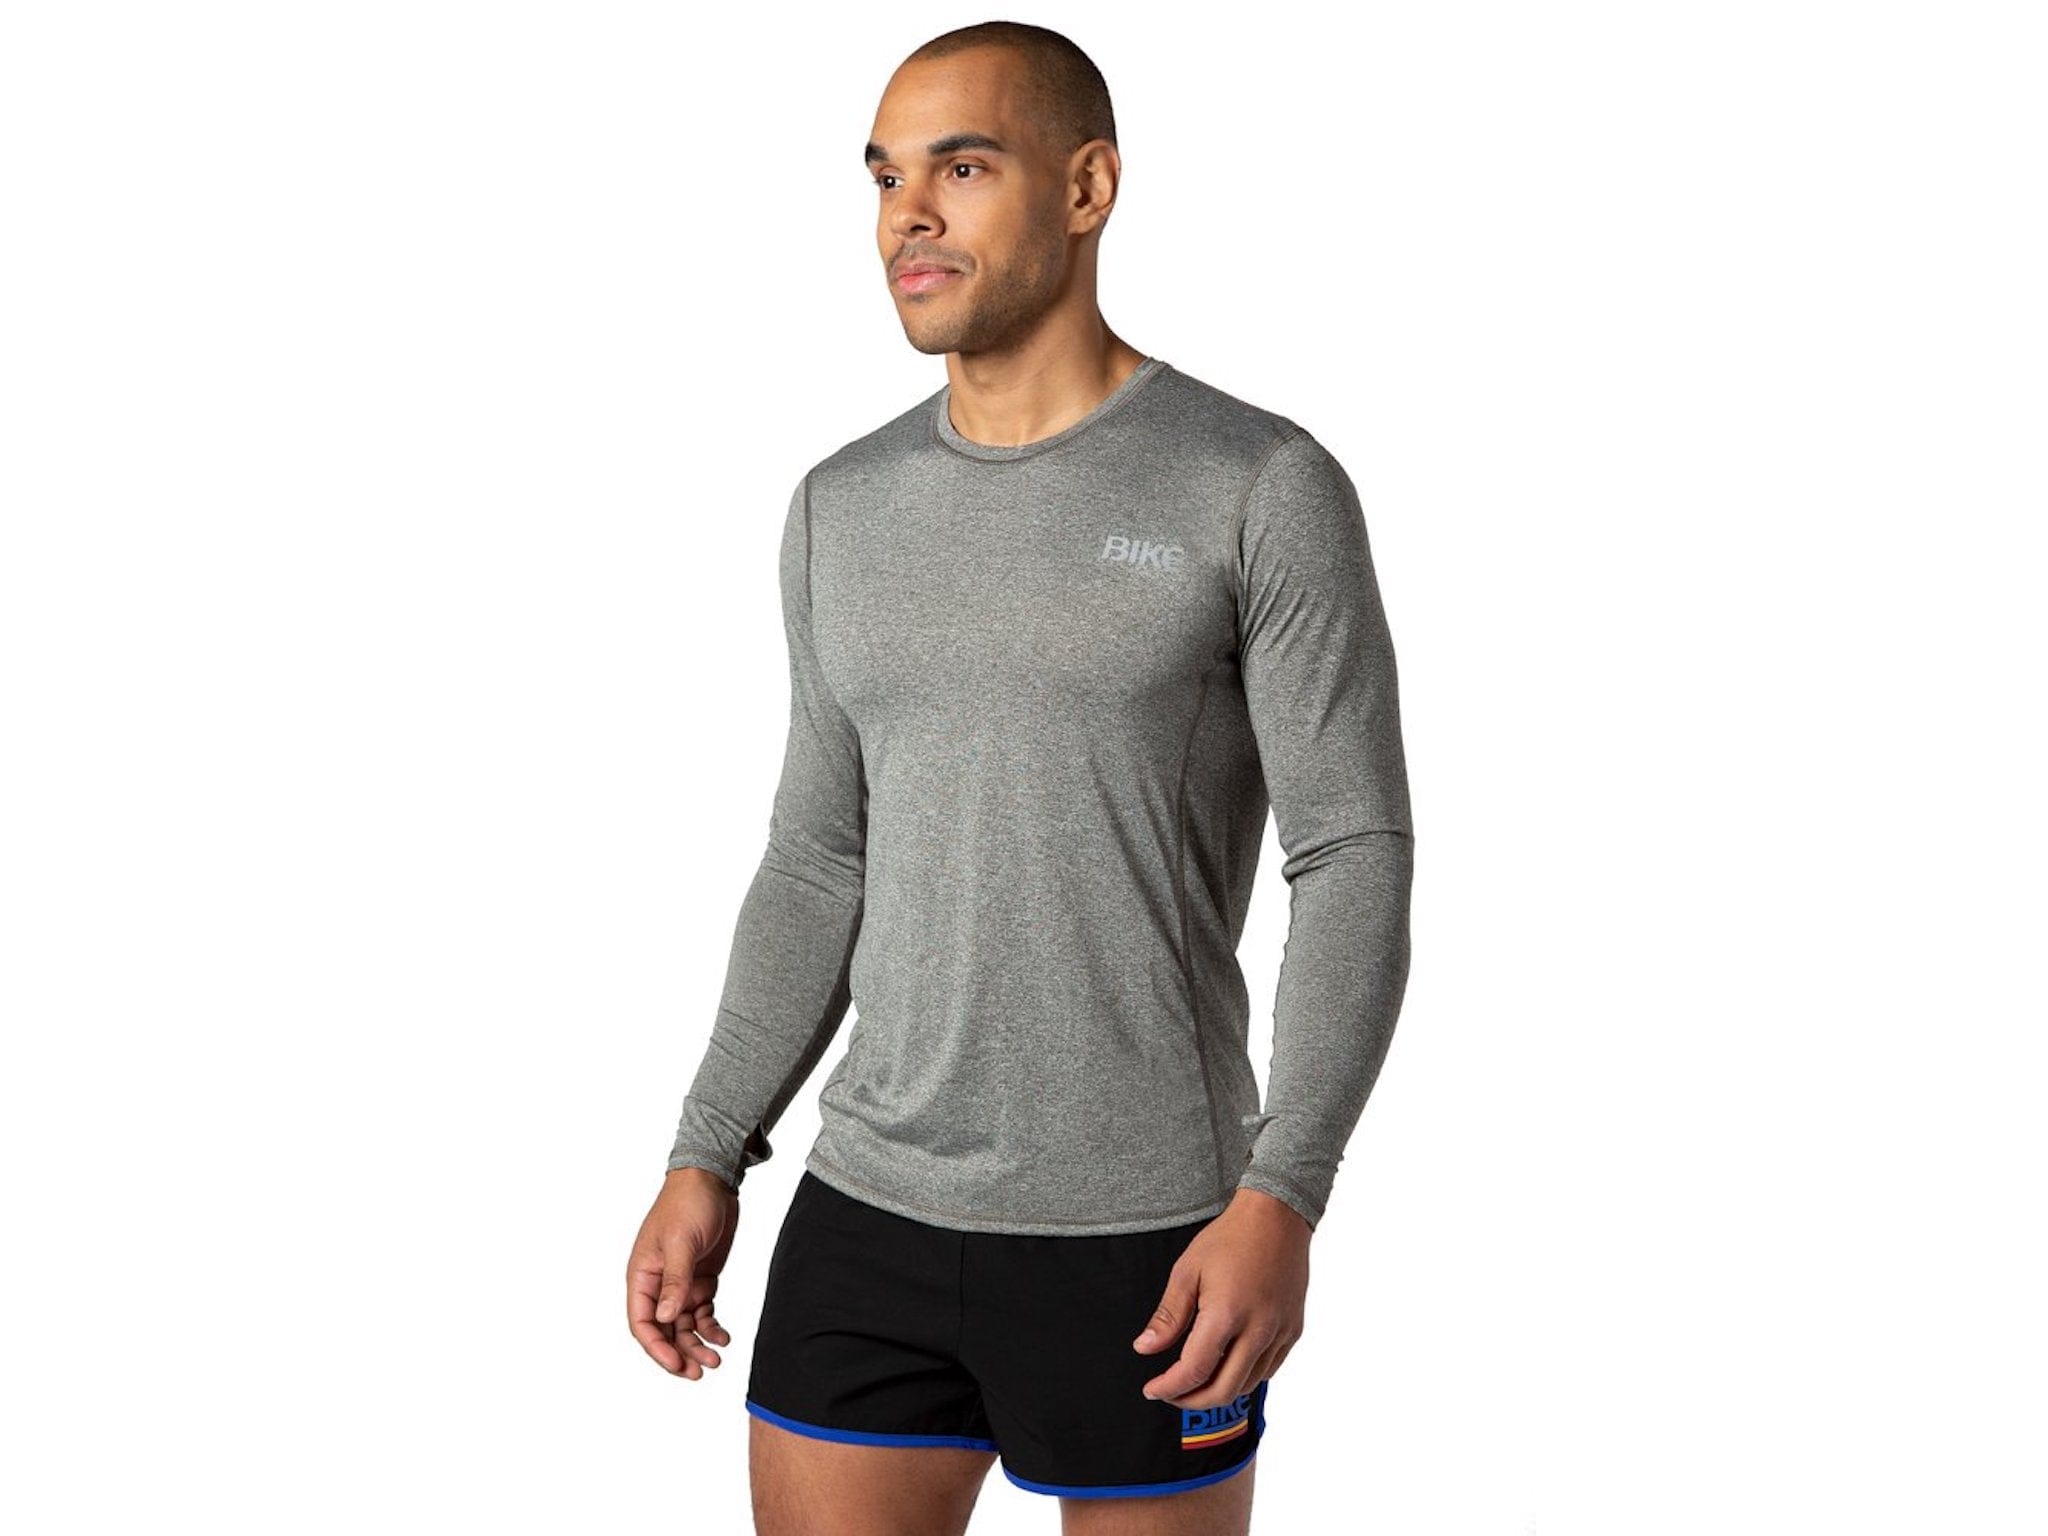 Men's Gray Shadow Sleeve Active Athletic Shirt - BIKE® Athletic Athletic